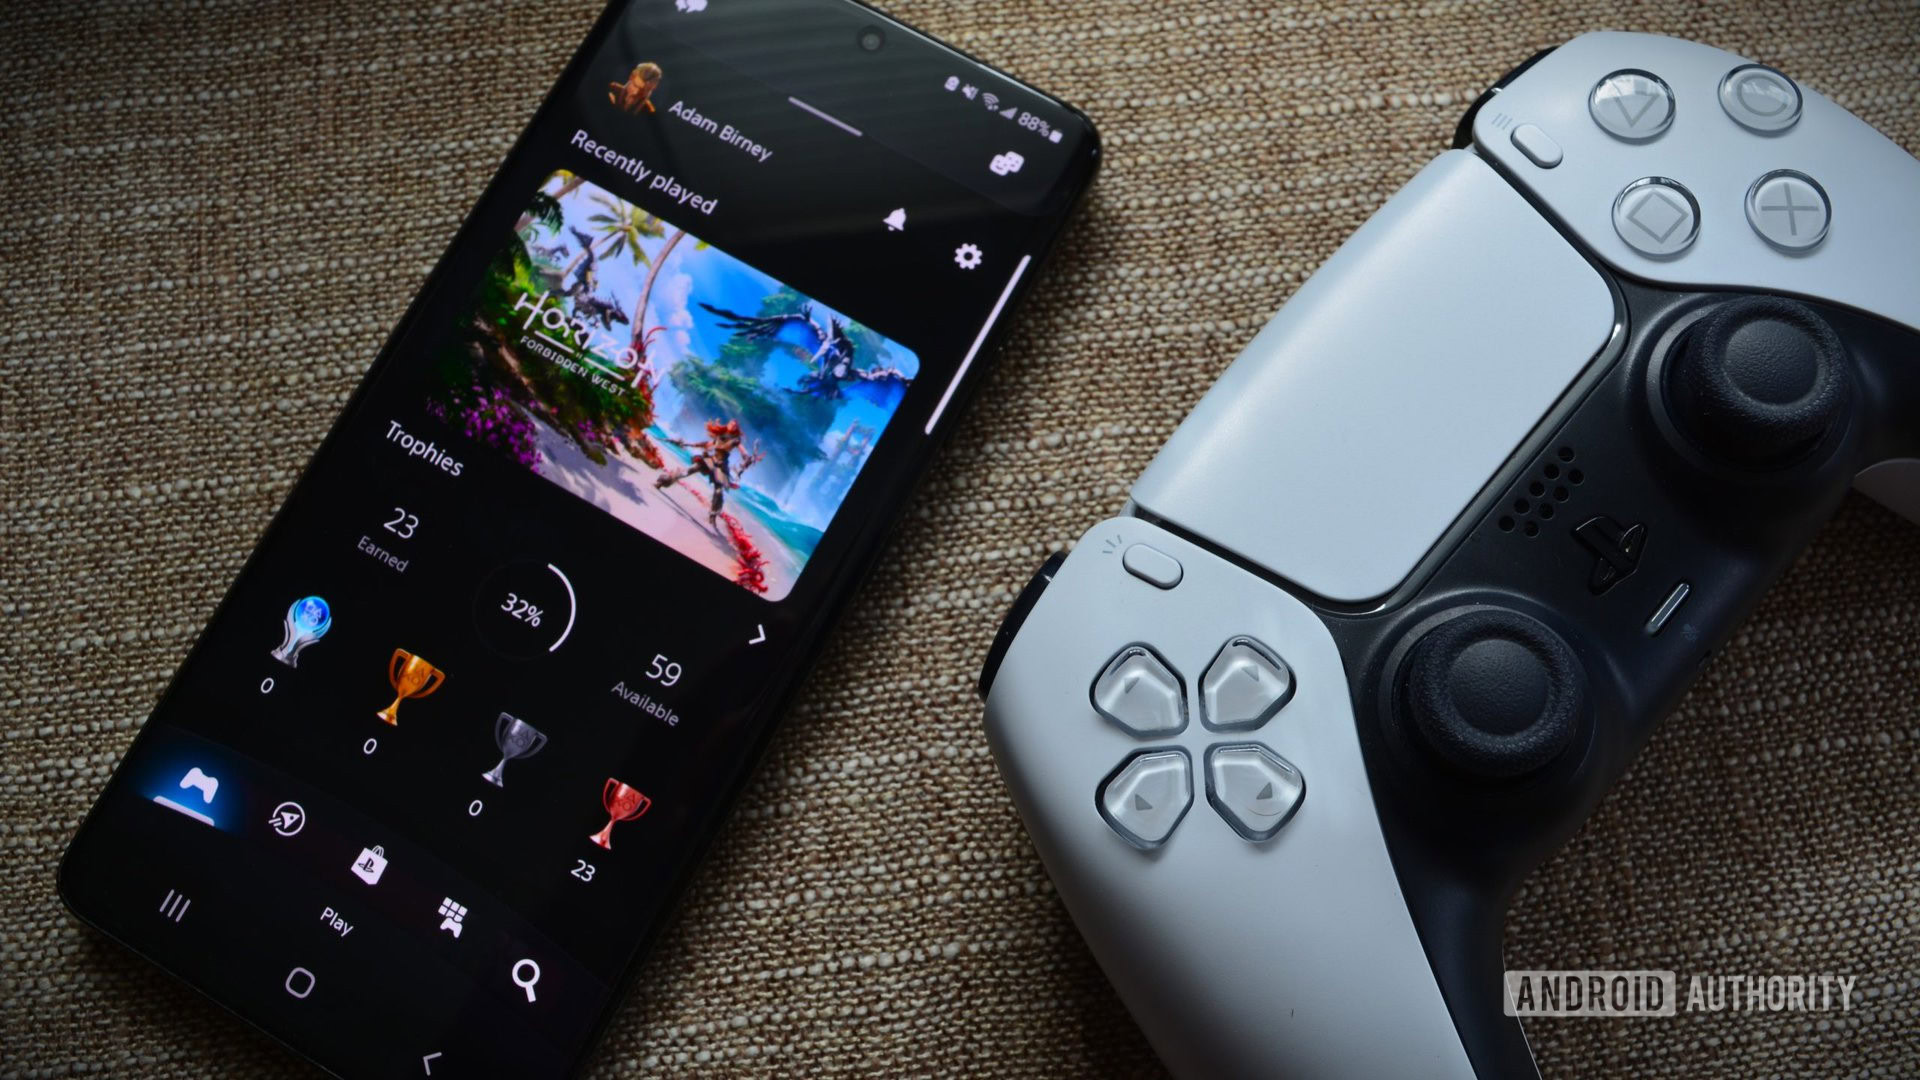 How to Play PS4, PS5 Games on Any Mobile Device Using Remote Play